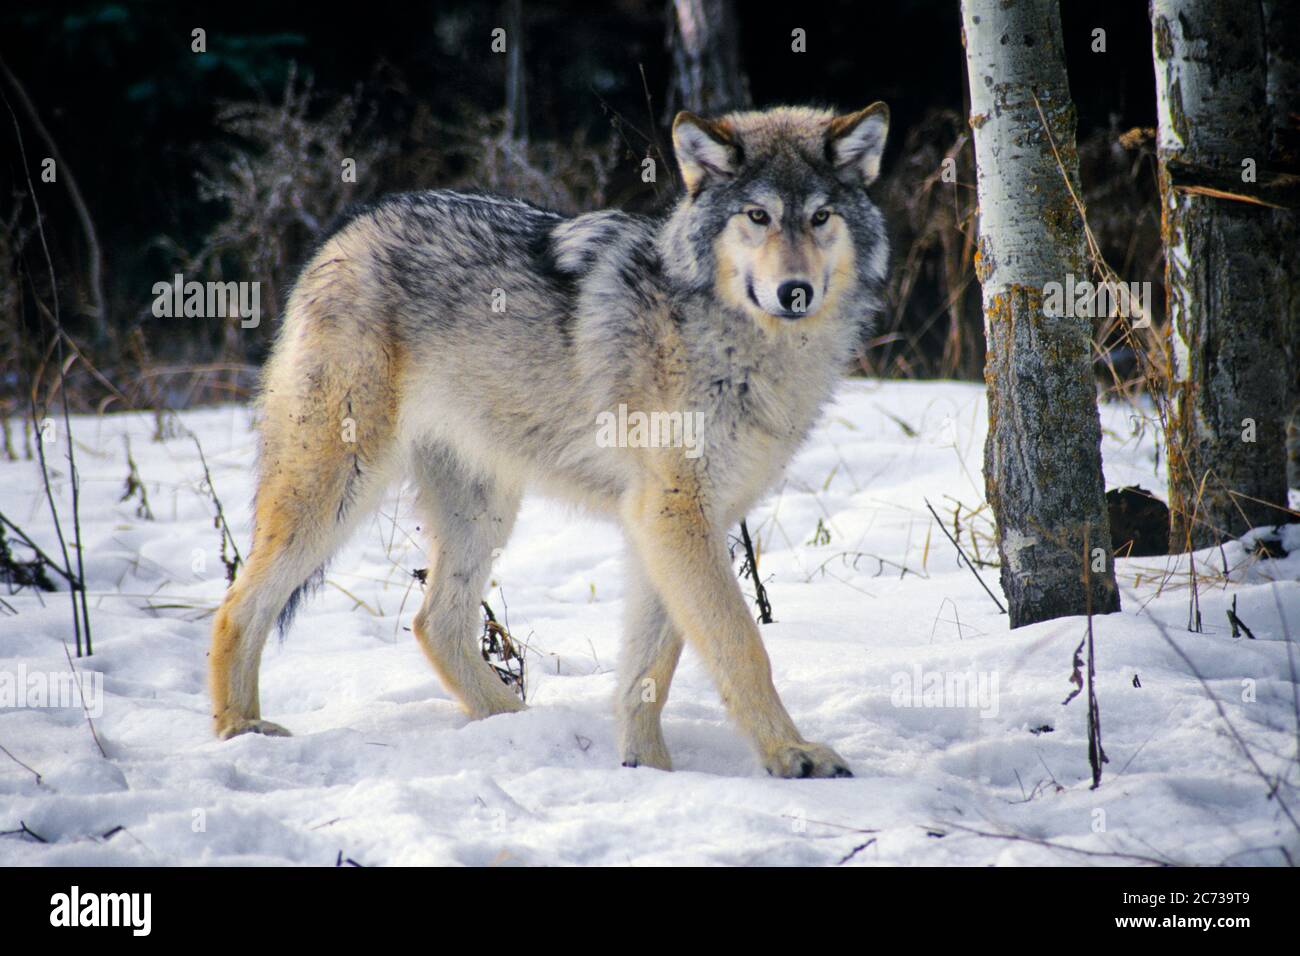 SINGLE WOLF IN SNOW BY WOODS MONTANA LOOKING AT CAMERA - kz5134 HFF002 HARS GRAY MAMMAL ROCKY MOUNTAINS WILDLIFE ENDANGERED Stock Photo